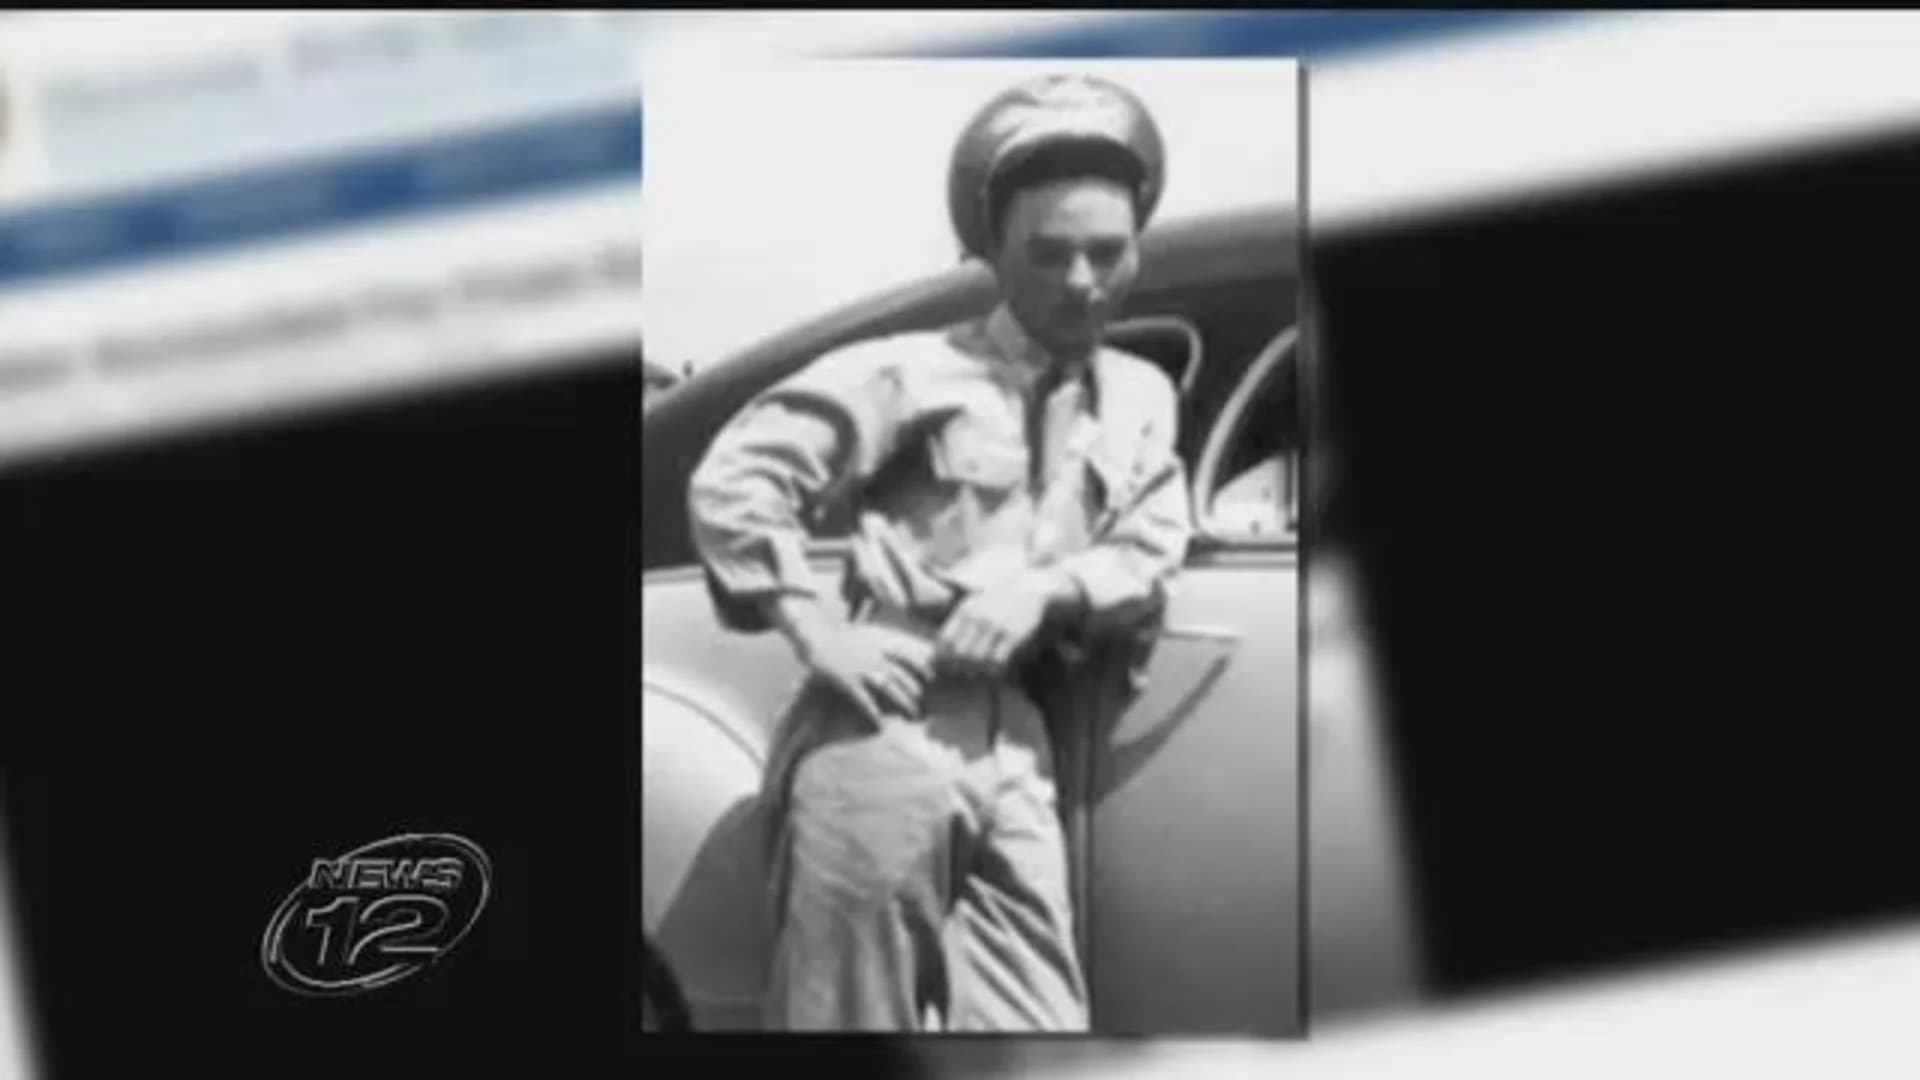 Korean War veteran’s remains returned to US after 70 years